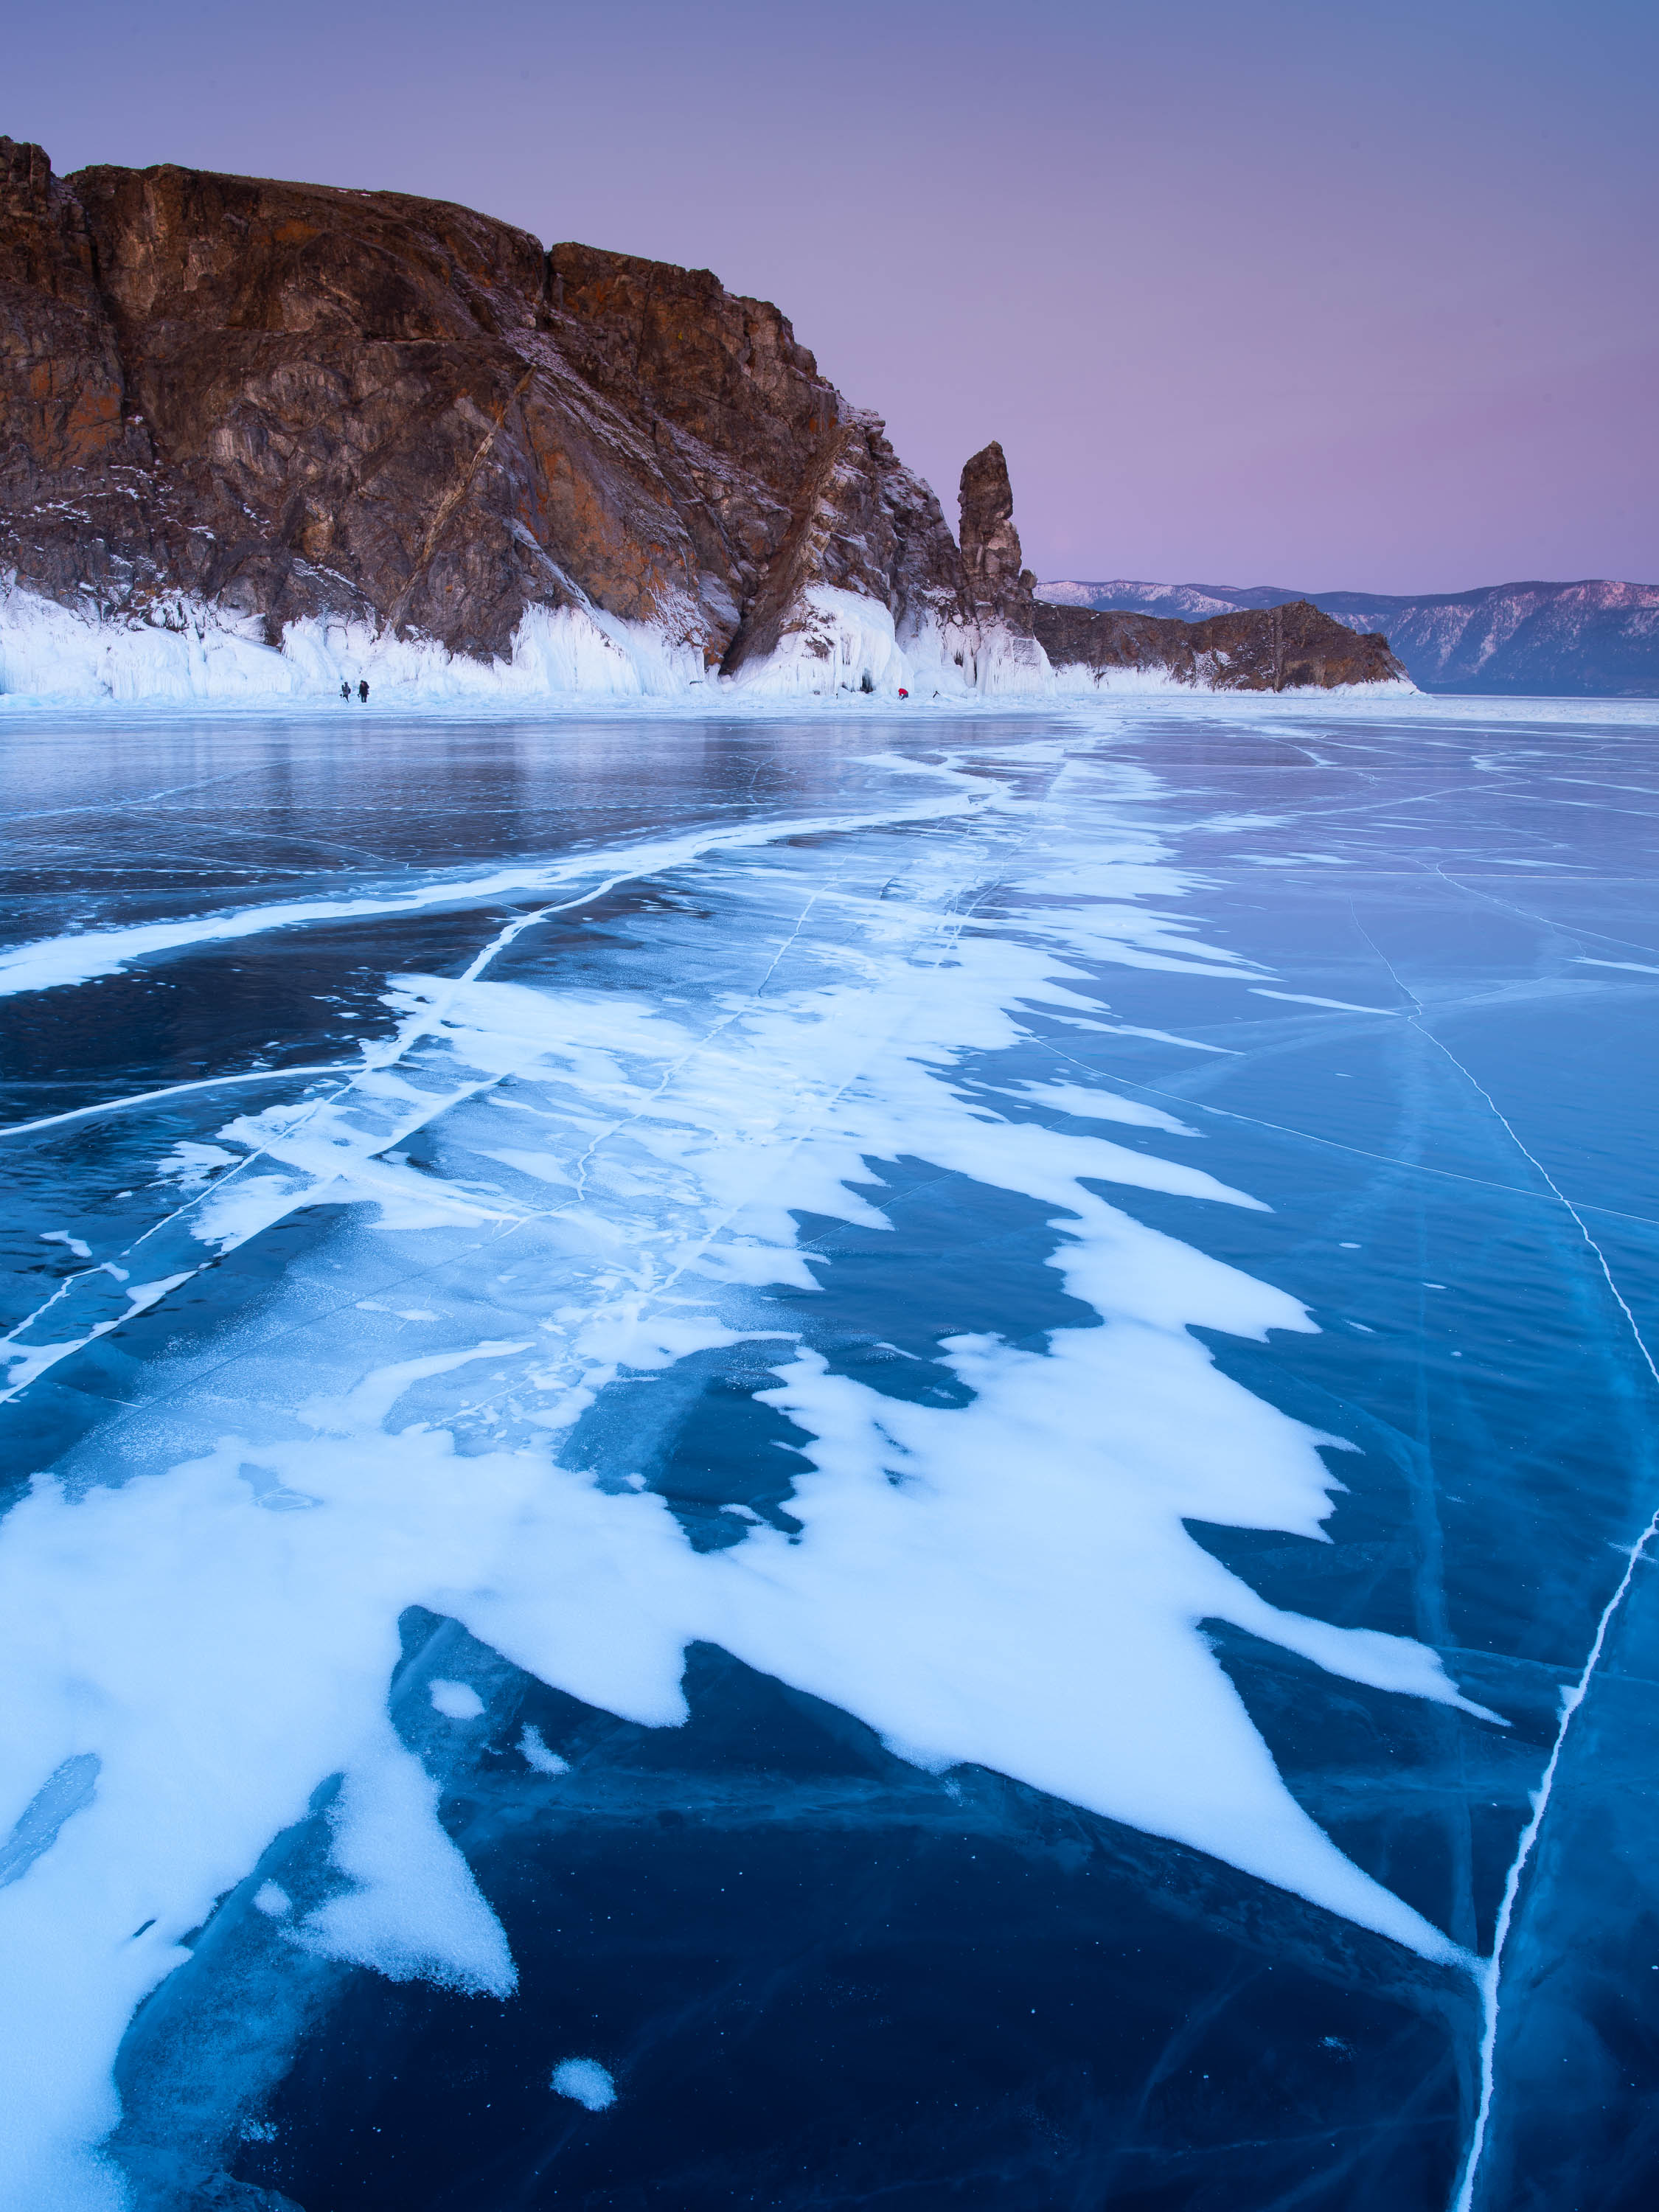 Frozen lake with a large black mountain in the background, Lake Baikal #1, Siberia, Russia 